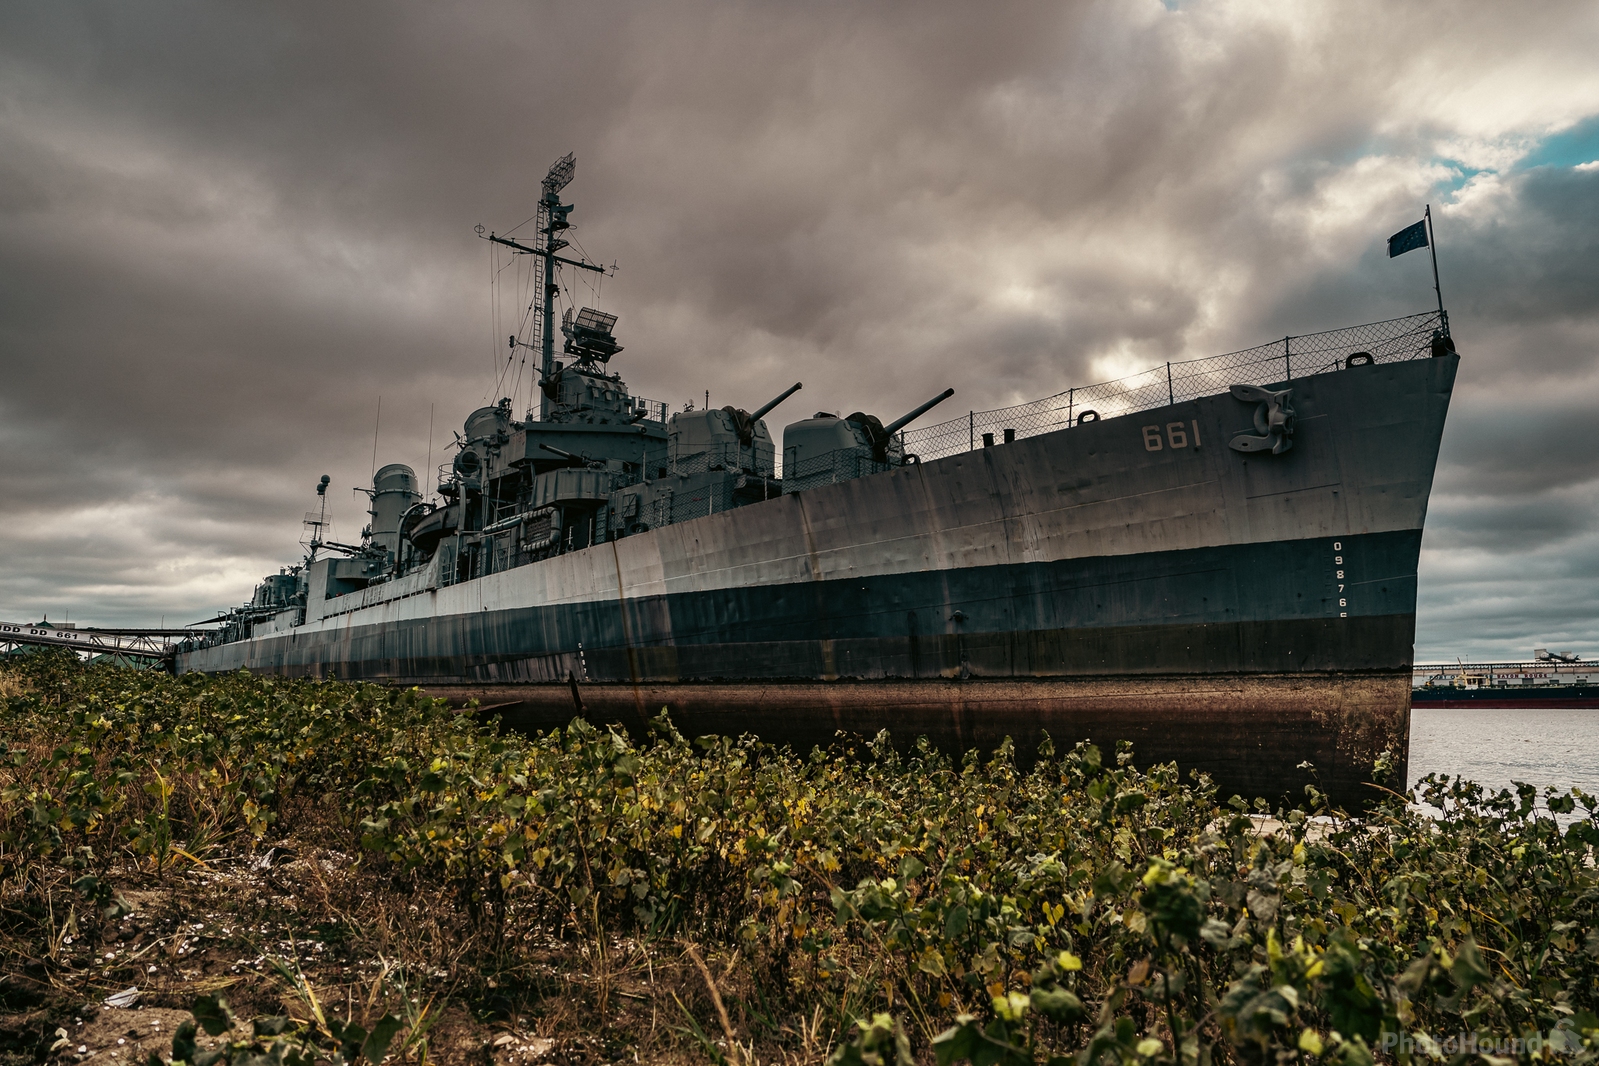 Image of USS Kidd from the Mississippi shoreline by James Billings.